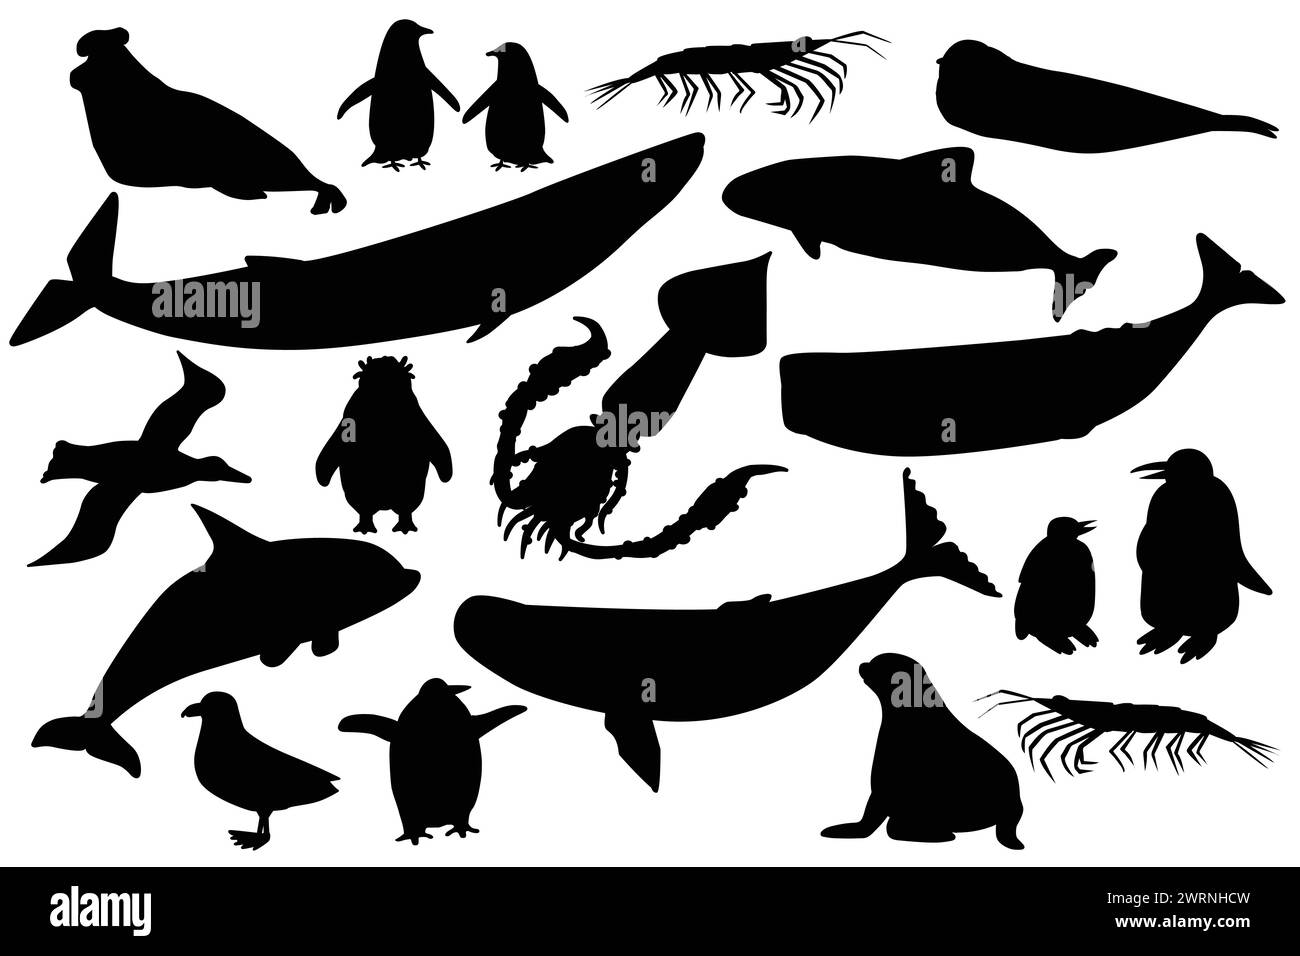 Vector silhouett shape black set of animals in Antarctica. Hand drawn collection of whales, penguins, skua, krill, seals, porpoise. Stock Vector